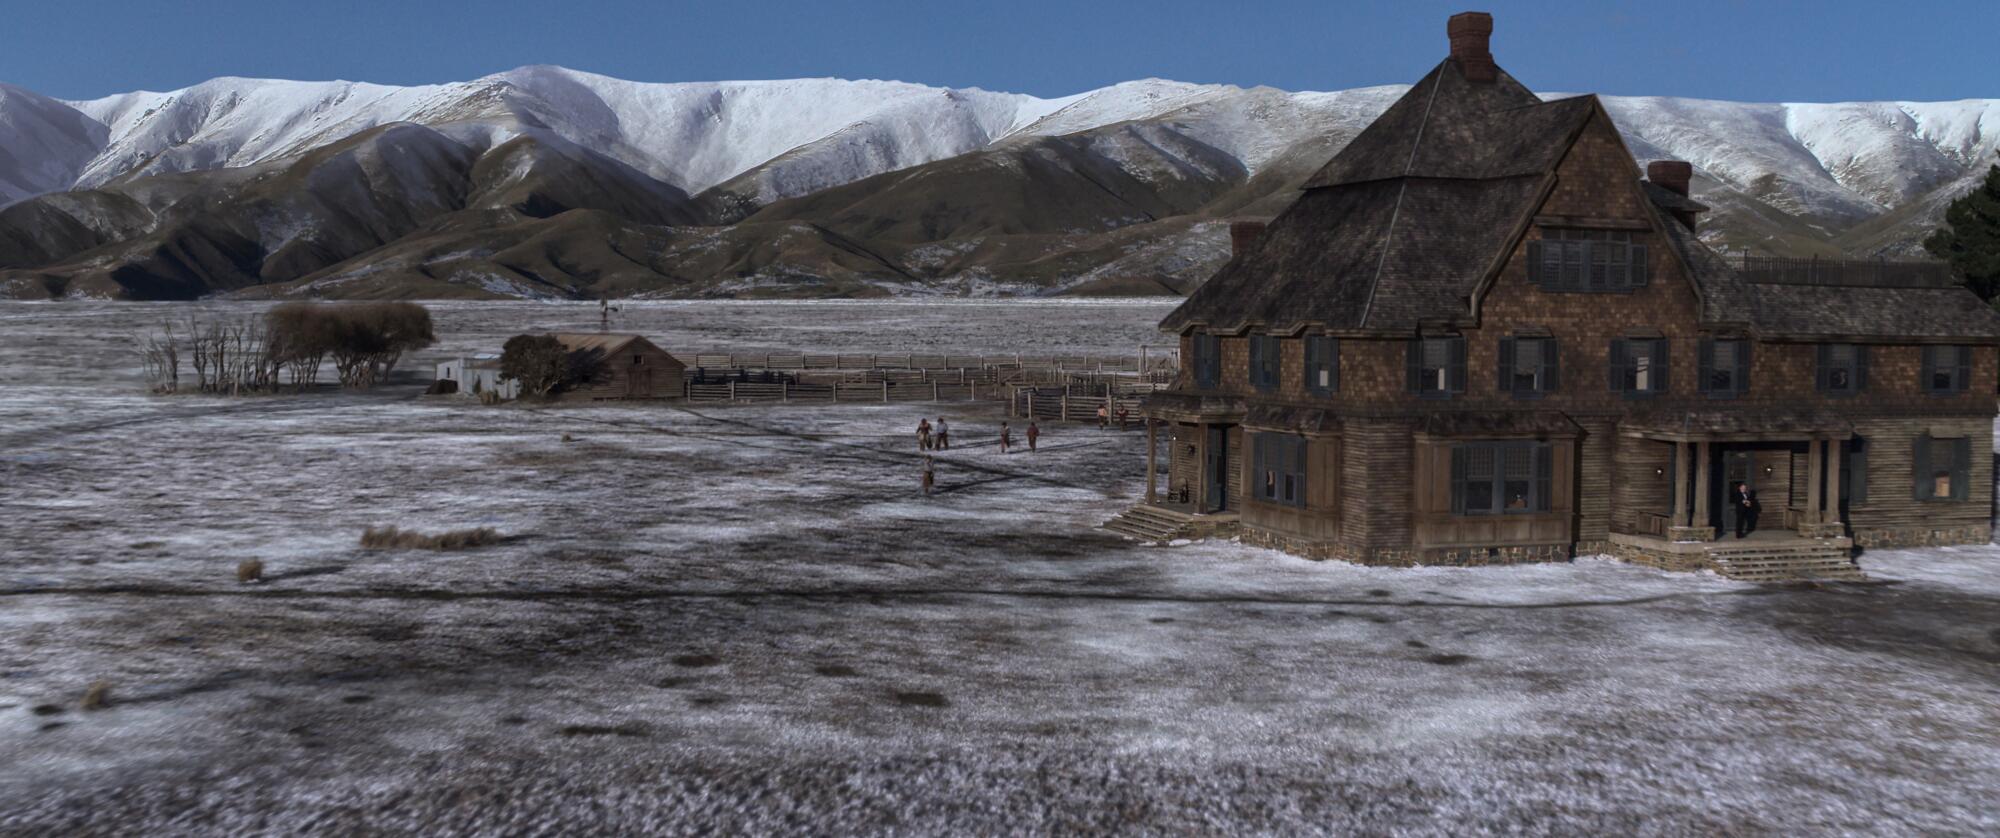 The large Burbank ranch property in "The Power of The Dog" is dusted with snow.